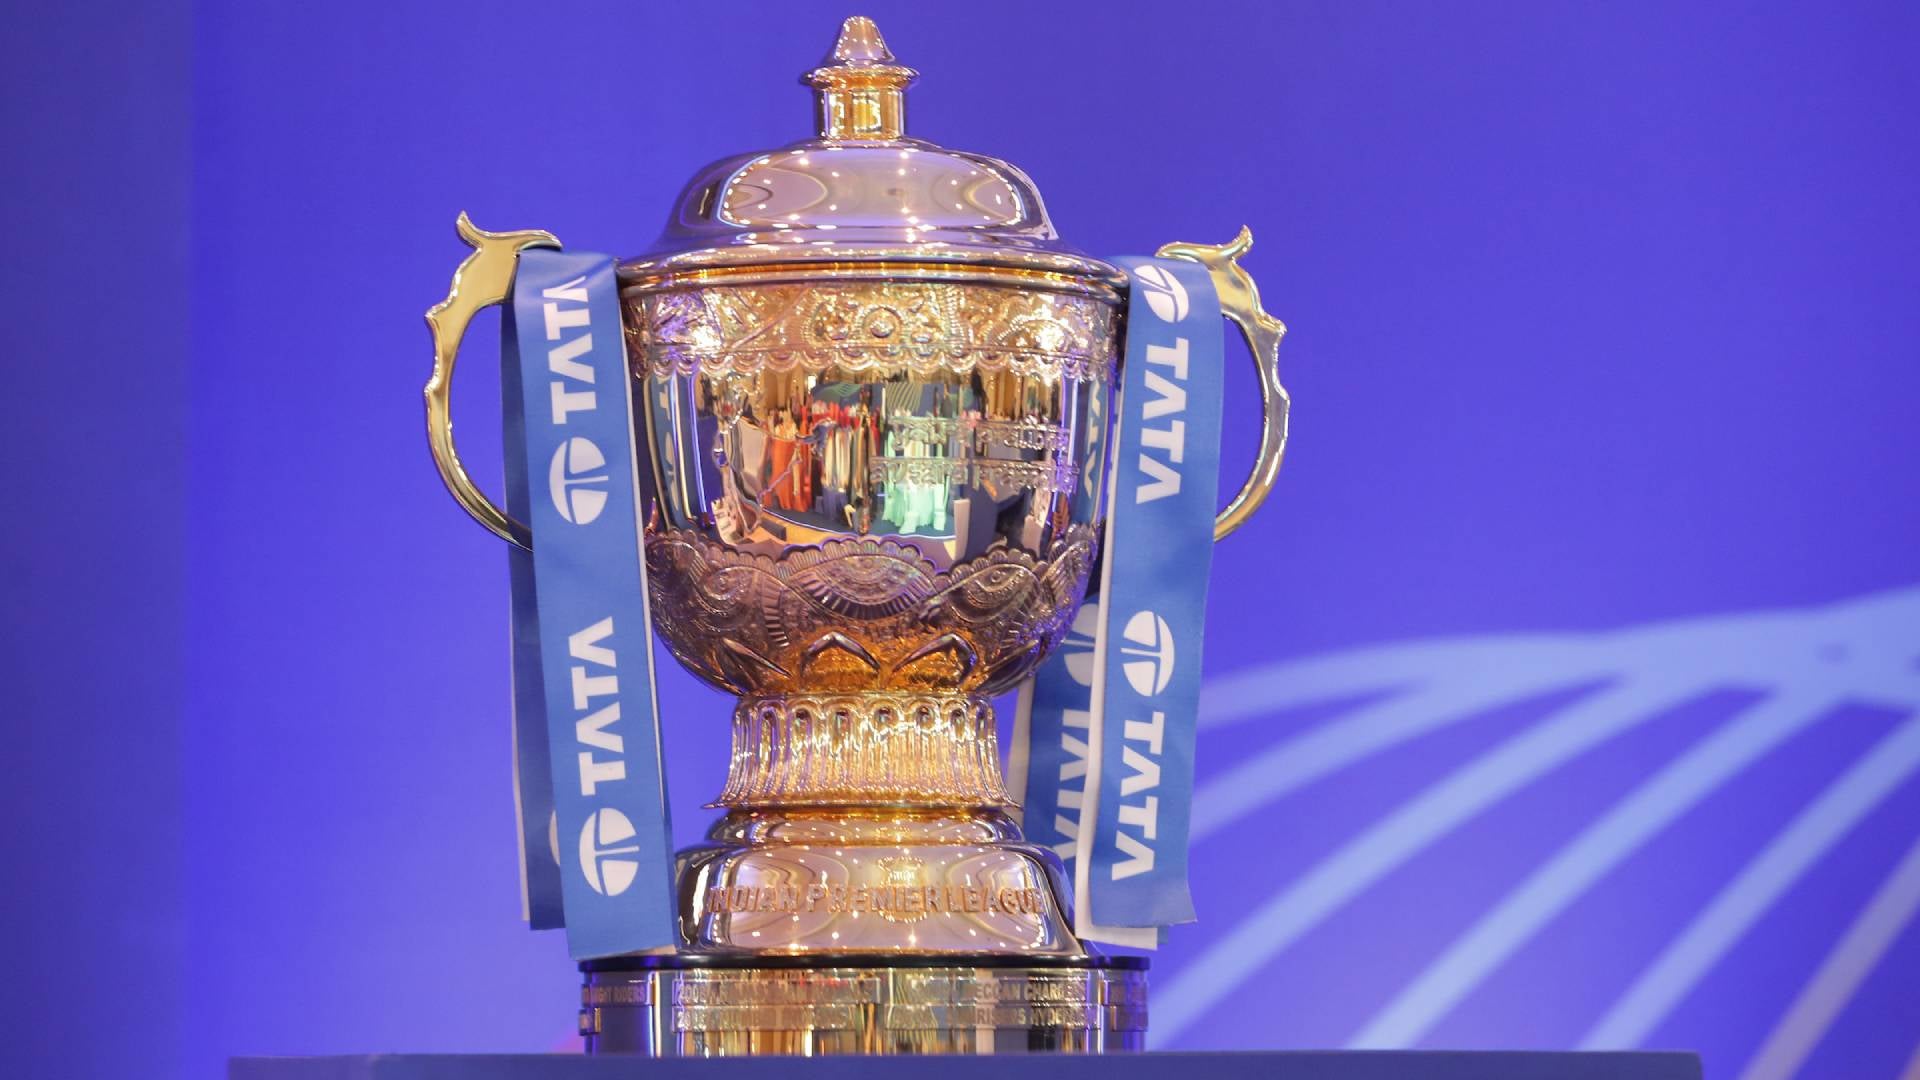 Domestic rights for IPL 2023-27 sell for $6.1bn